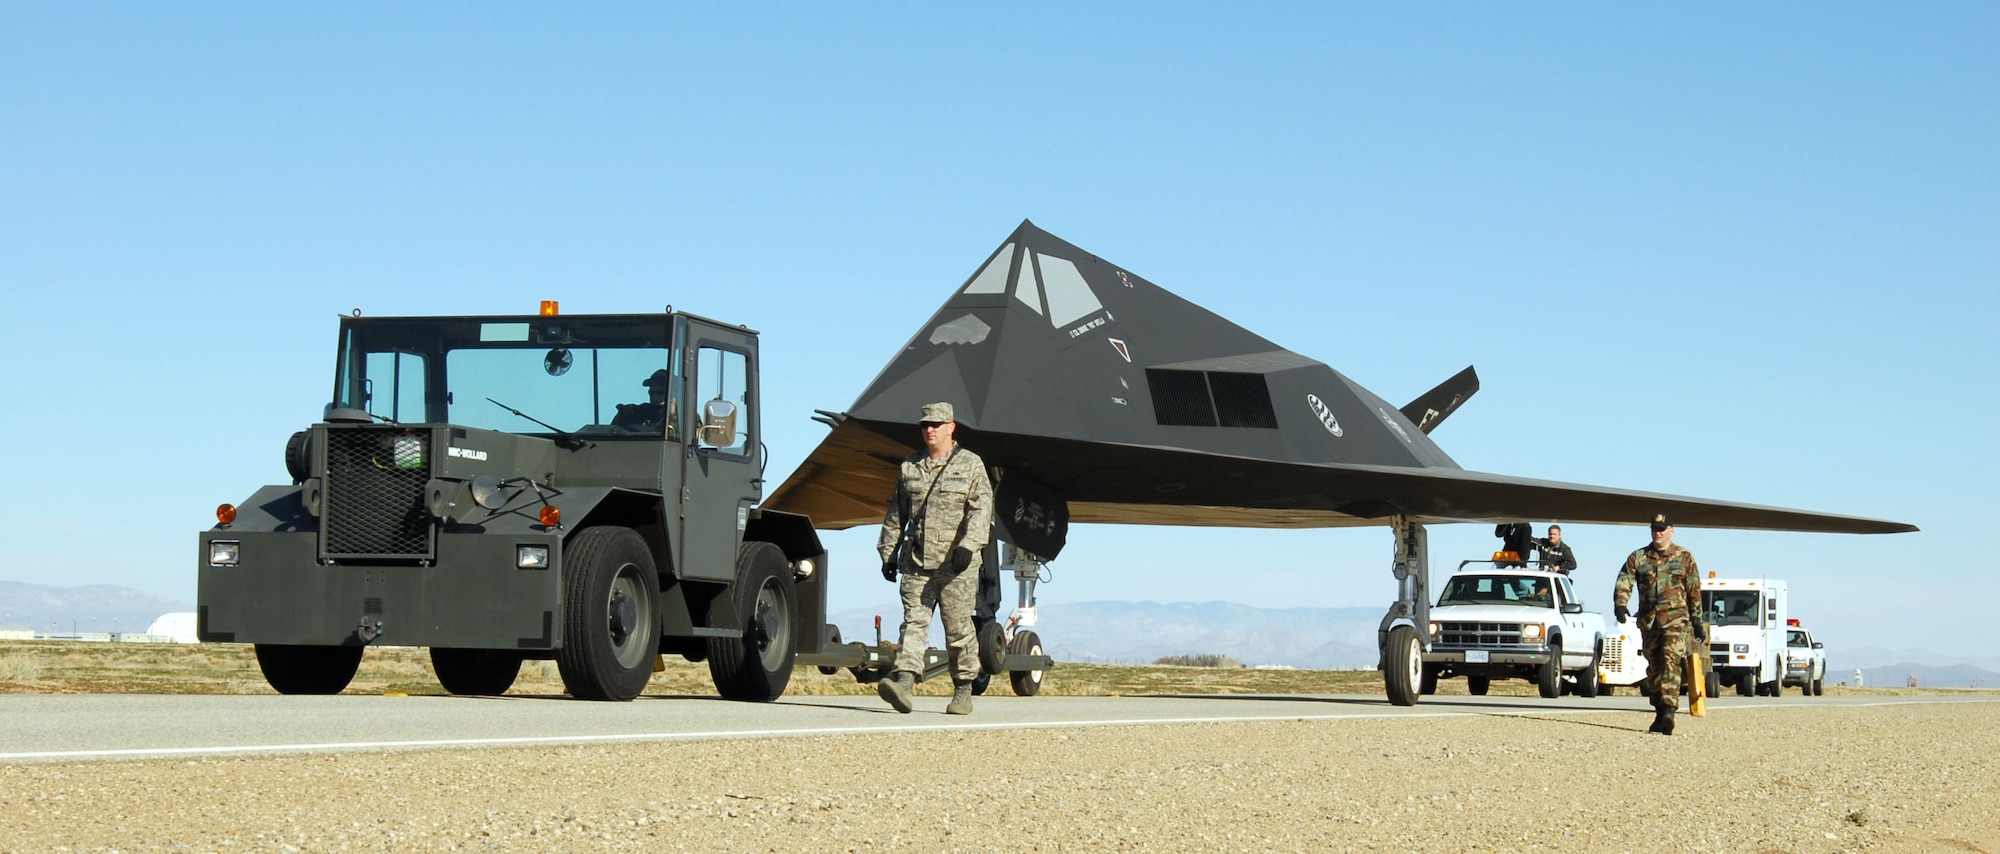 PALMDALE, Calif. -- Volunteers with the 410th Flight Test Squadron here move an F-117 Nighthawk to the Blackbird Air Park at U.S. Air Force Plant 42 here March 3. The F-117 was decommissioned and transferred to the National Museum of the U.S. Air Force. (Air Force photo by Senior Airman Julius Delos Reyes)